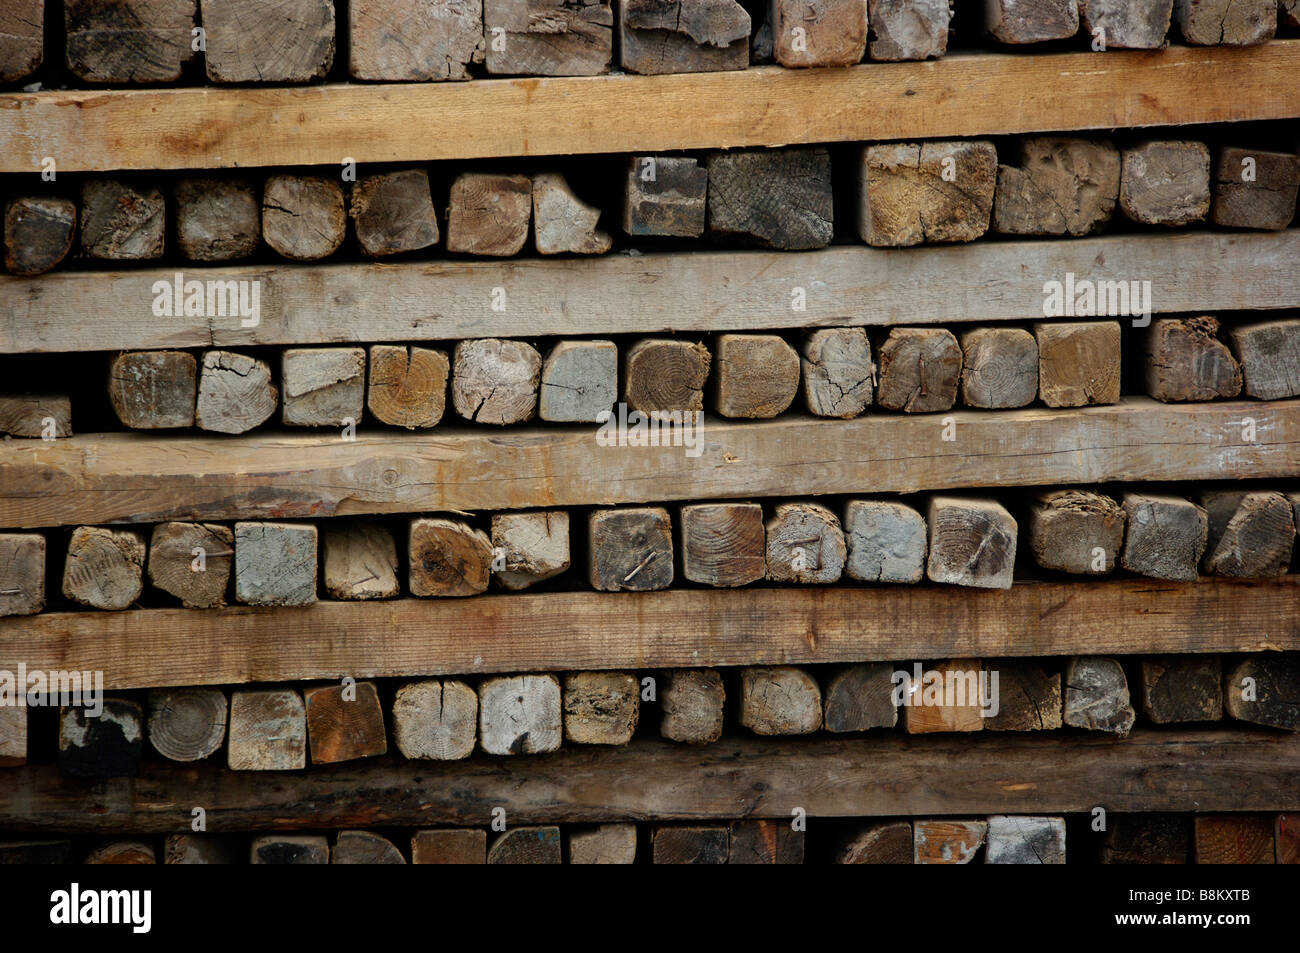 Logs, wood, planks and other lumber products stacked at construction site after forests and trees were harvested for building. Stock Photo